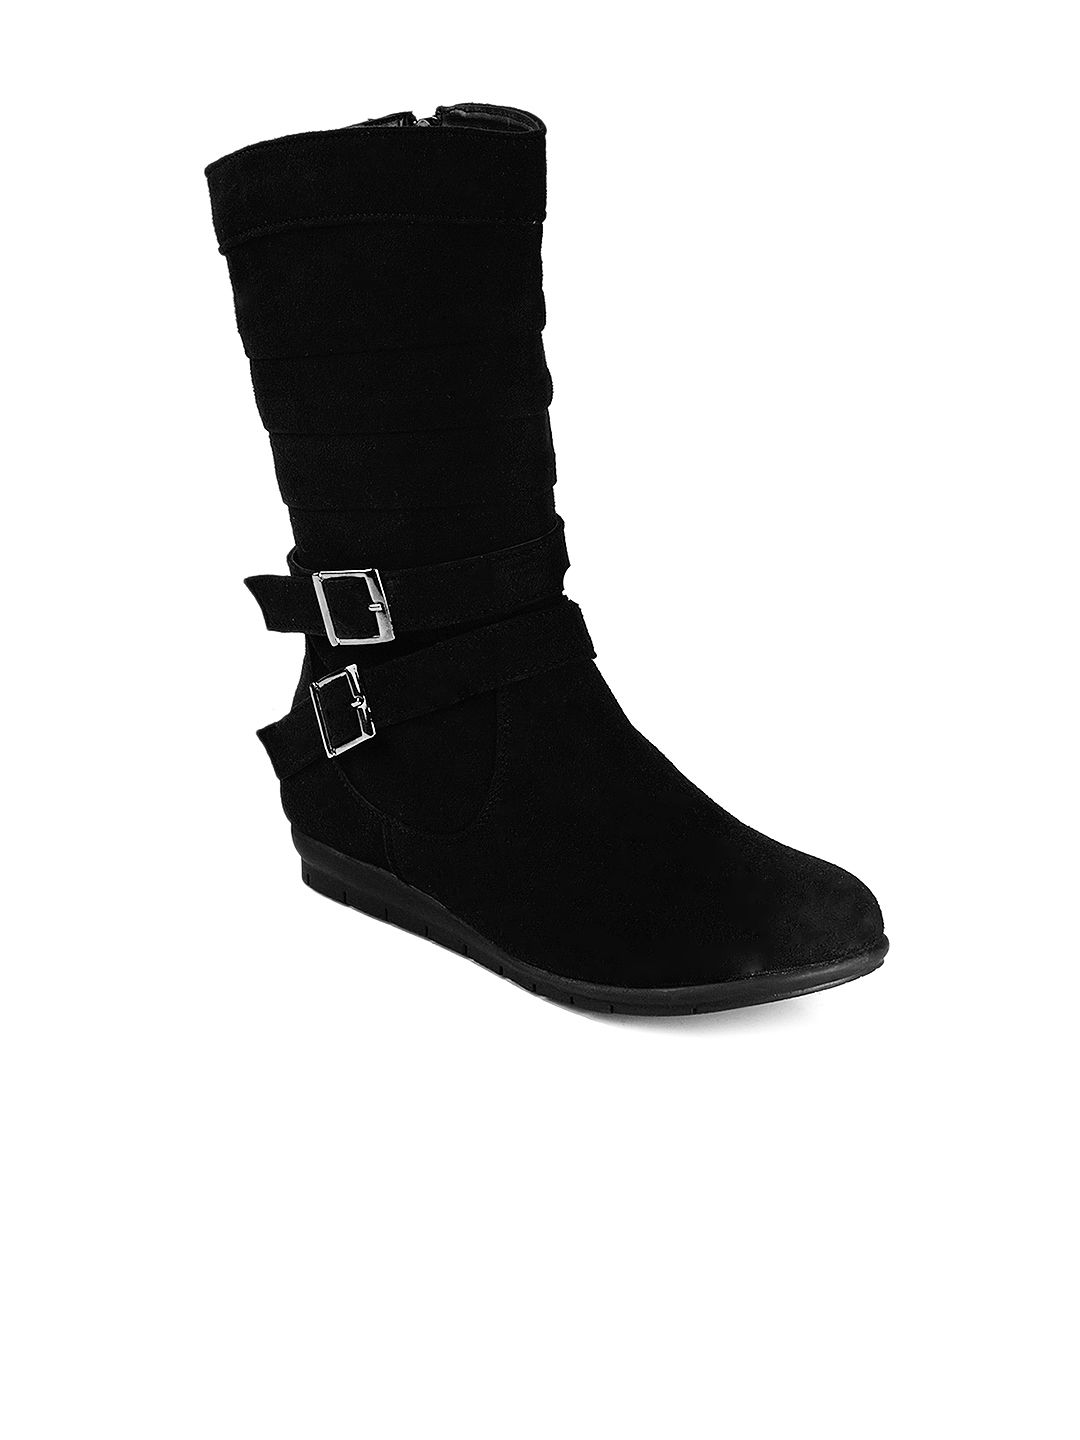 Bruno Manetti Women Black Suede Boots Price in India